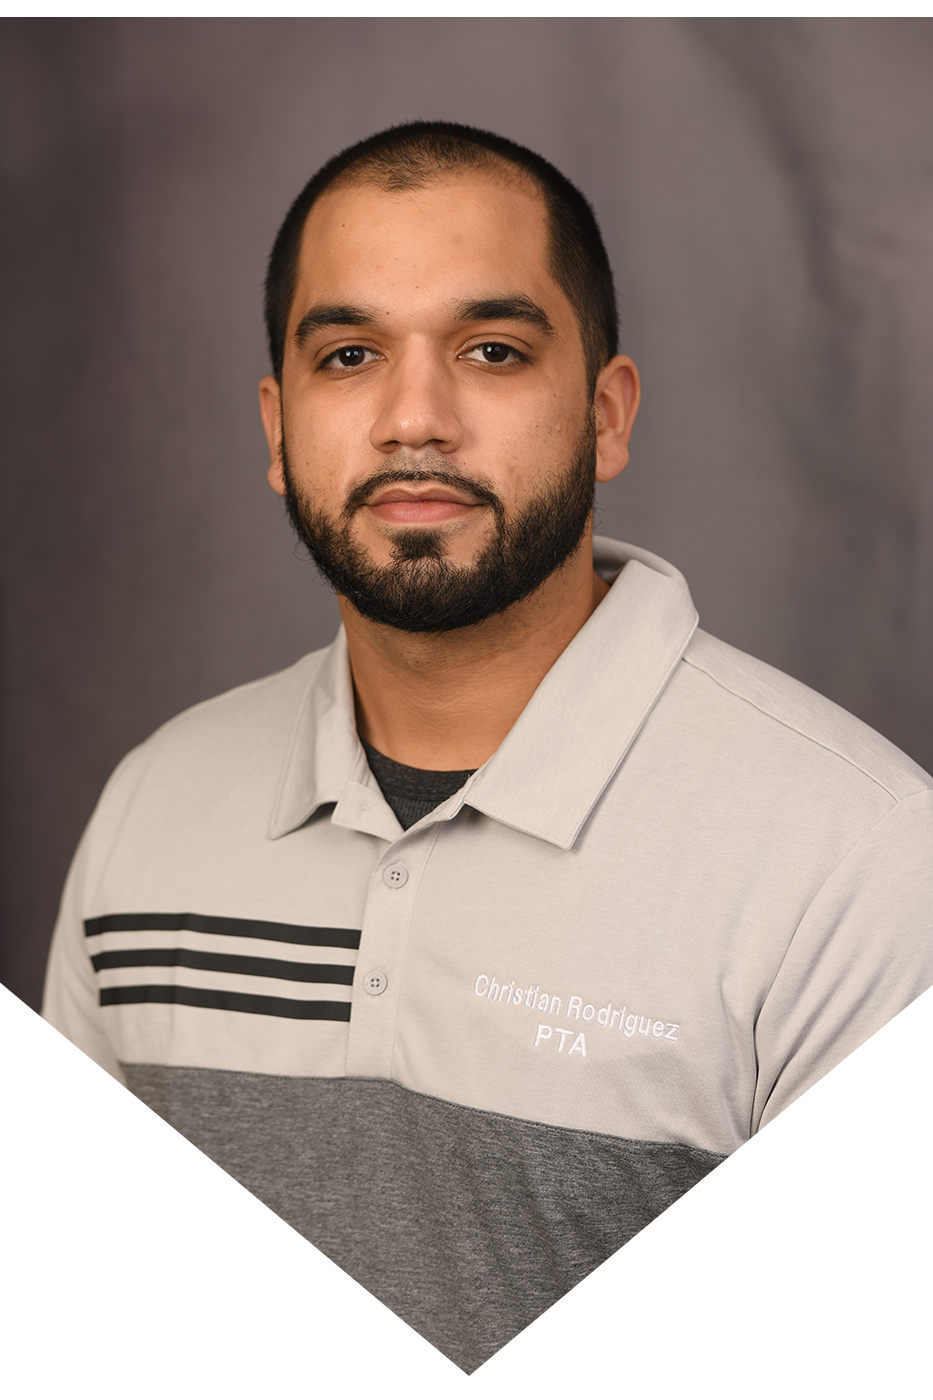 Christian Rodriguez, PT Assistant at Quinnipiac Physical Therapy & Sports Medicine